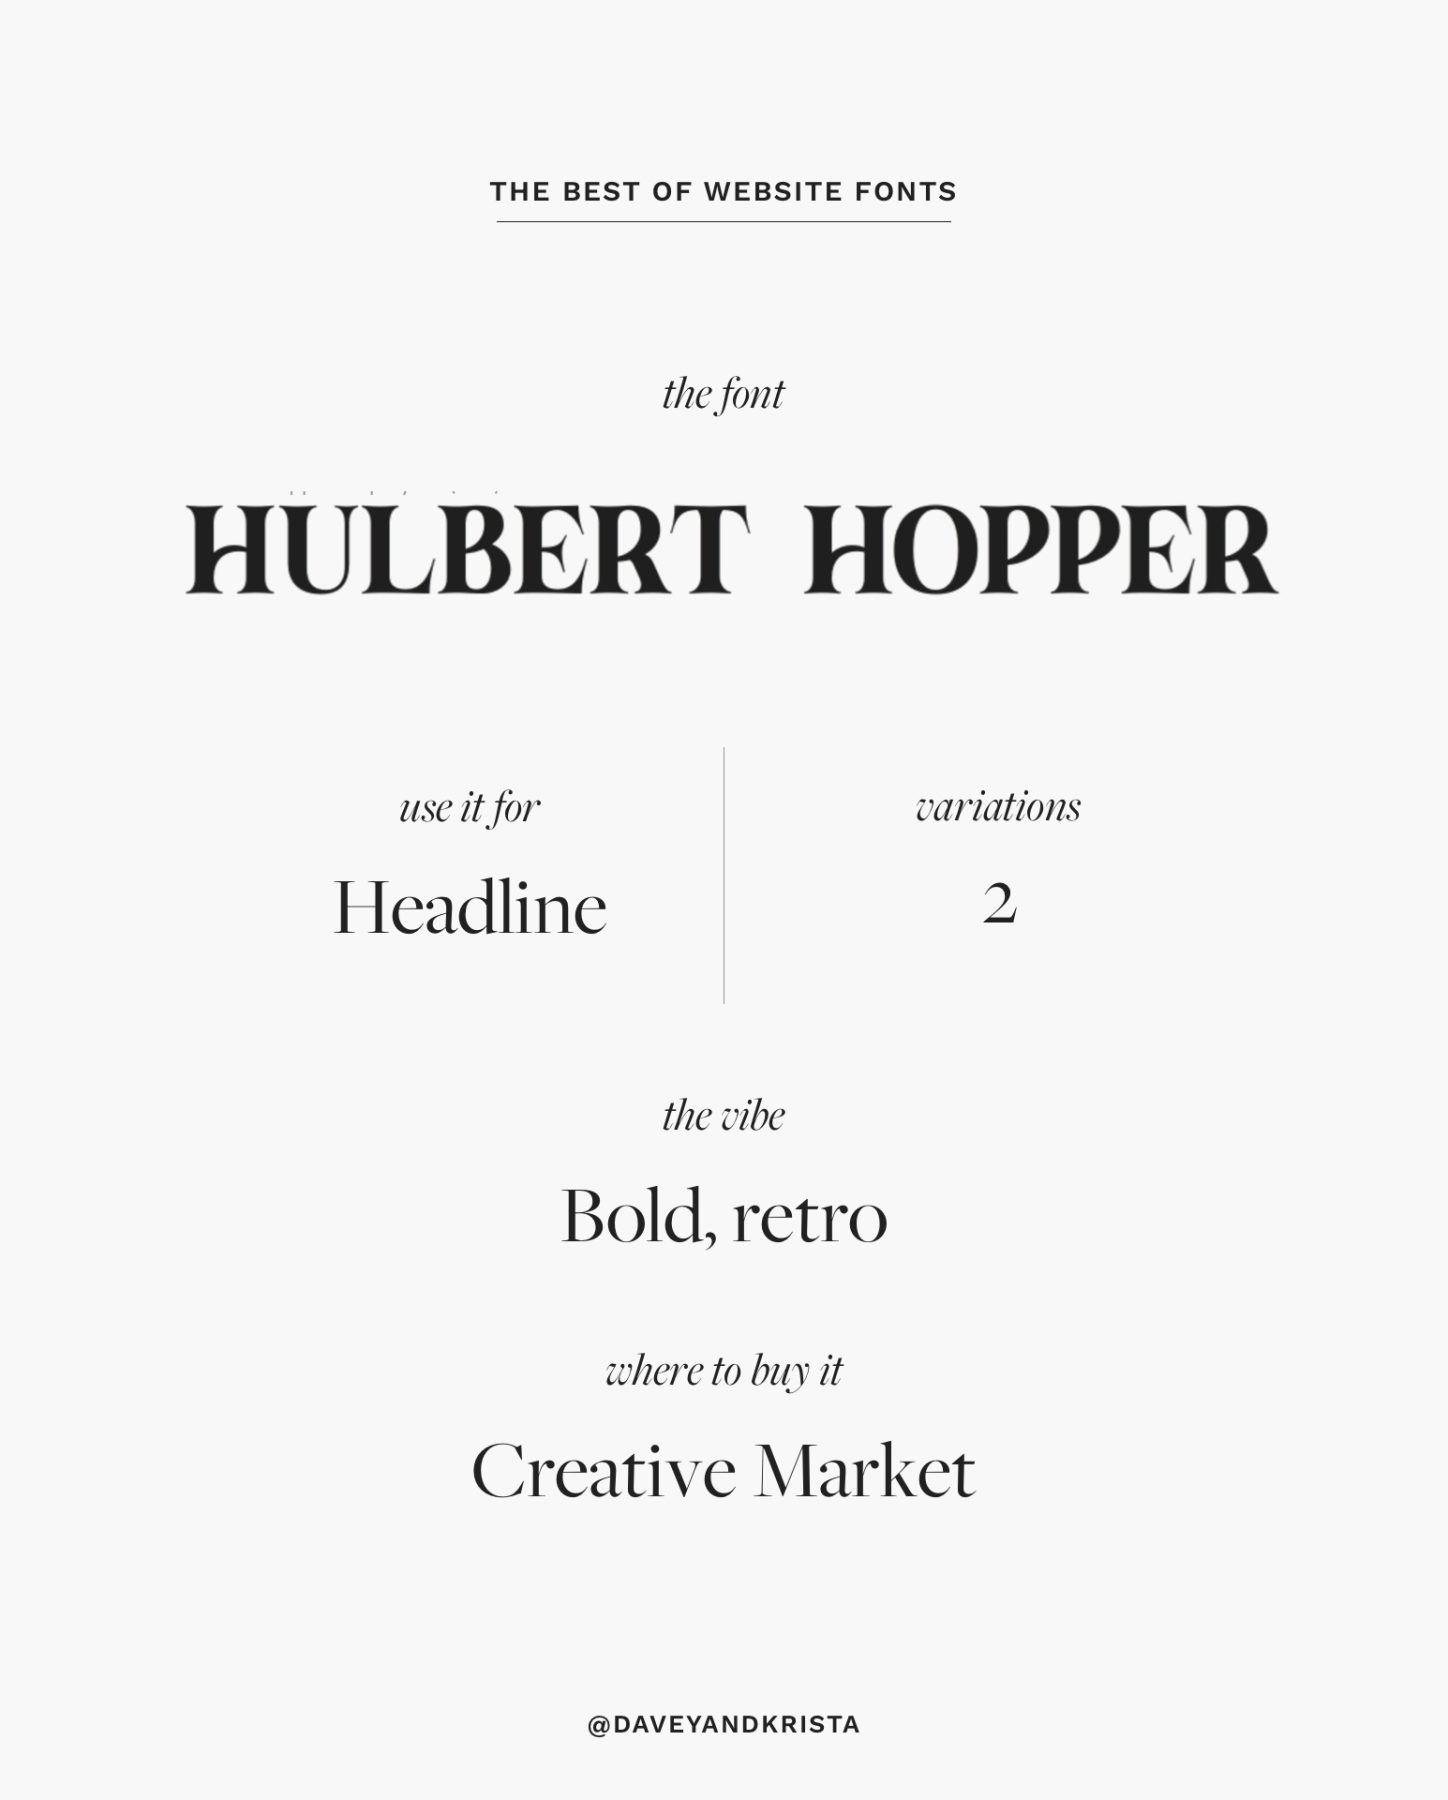 A font with a retro vibe - Hulbert Hopper | The Best Fonts for Websites